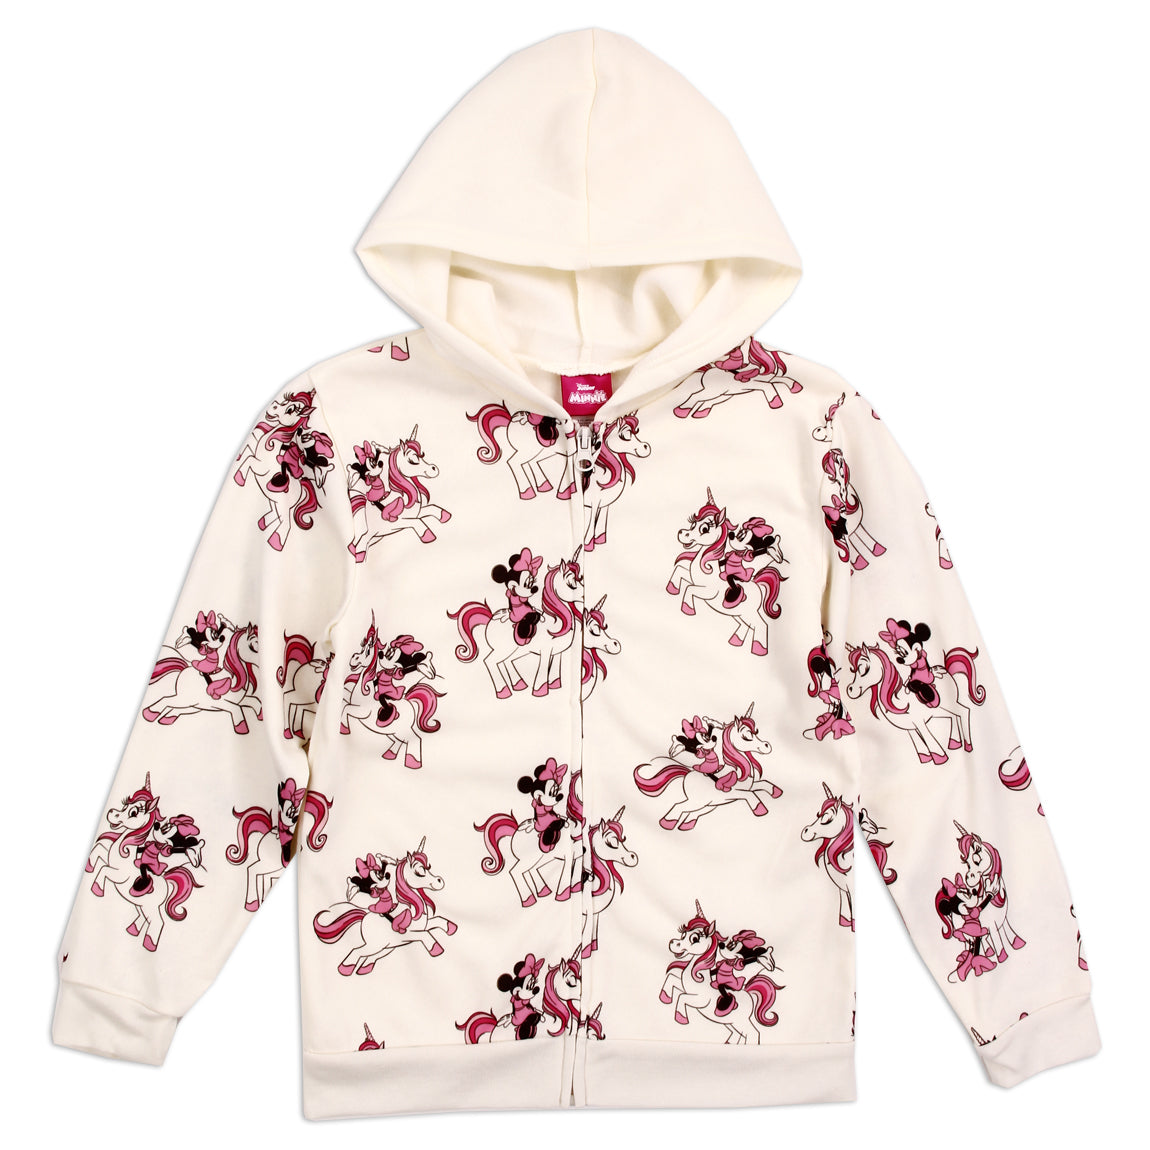 MINNIE MOUSE Girls 4-6X Lightweight Zip Up Hoodie (Pack of 6)